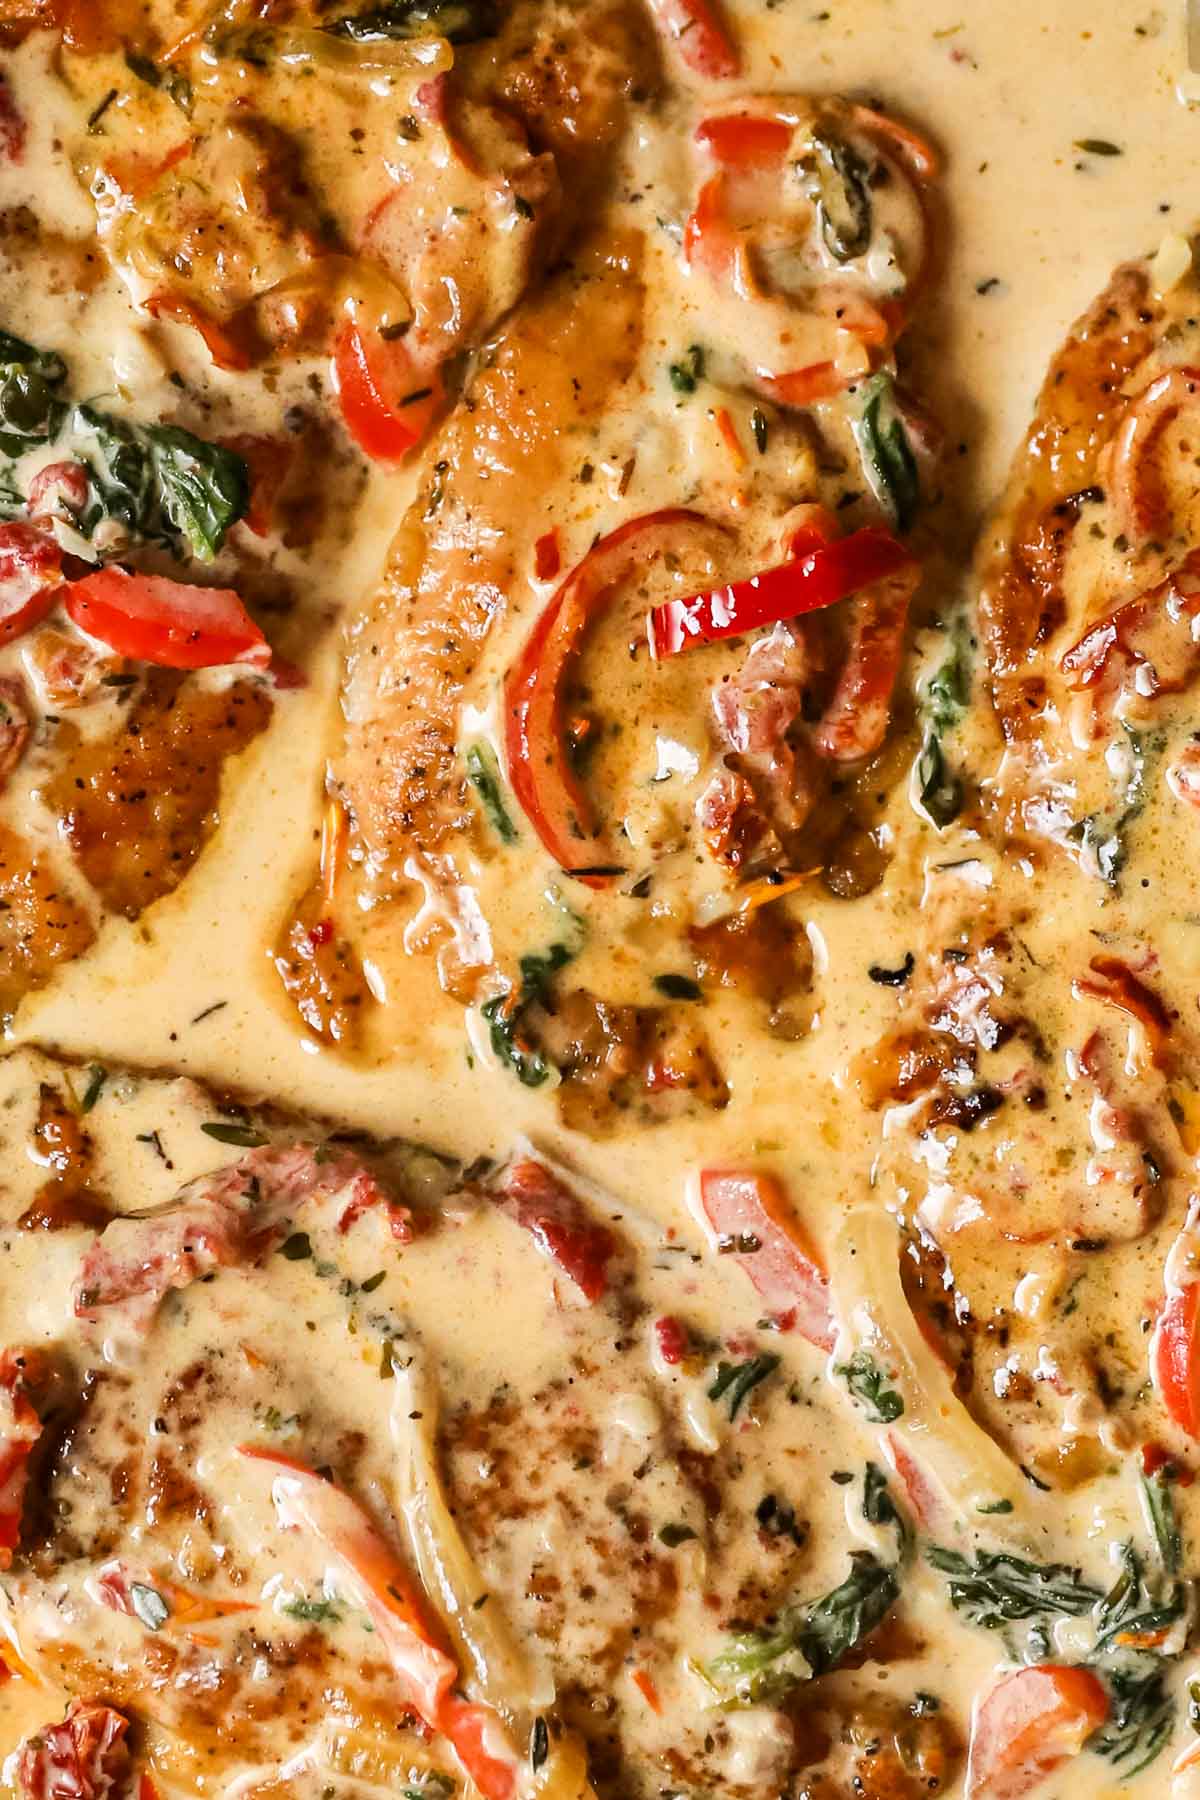 Close-up view of seared chicken in a cream sauce made with red peppers, spinach, and sun dried tomatoes.